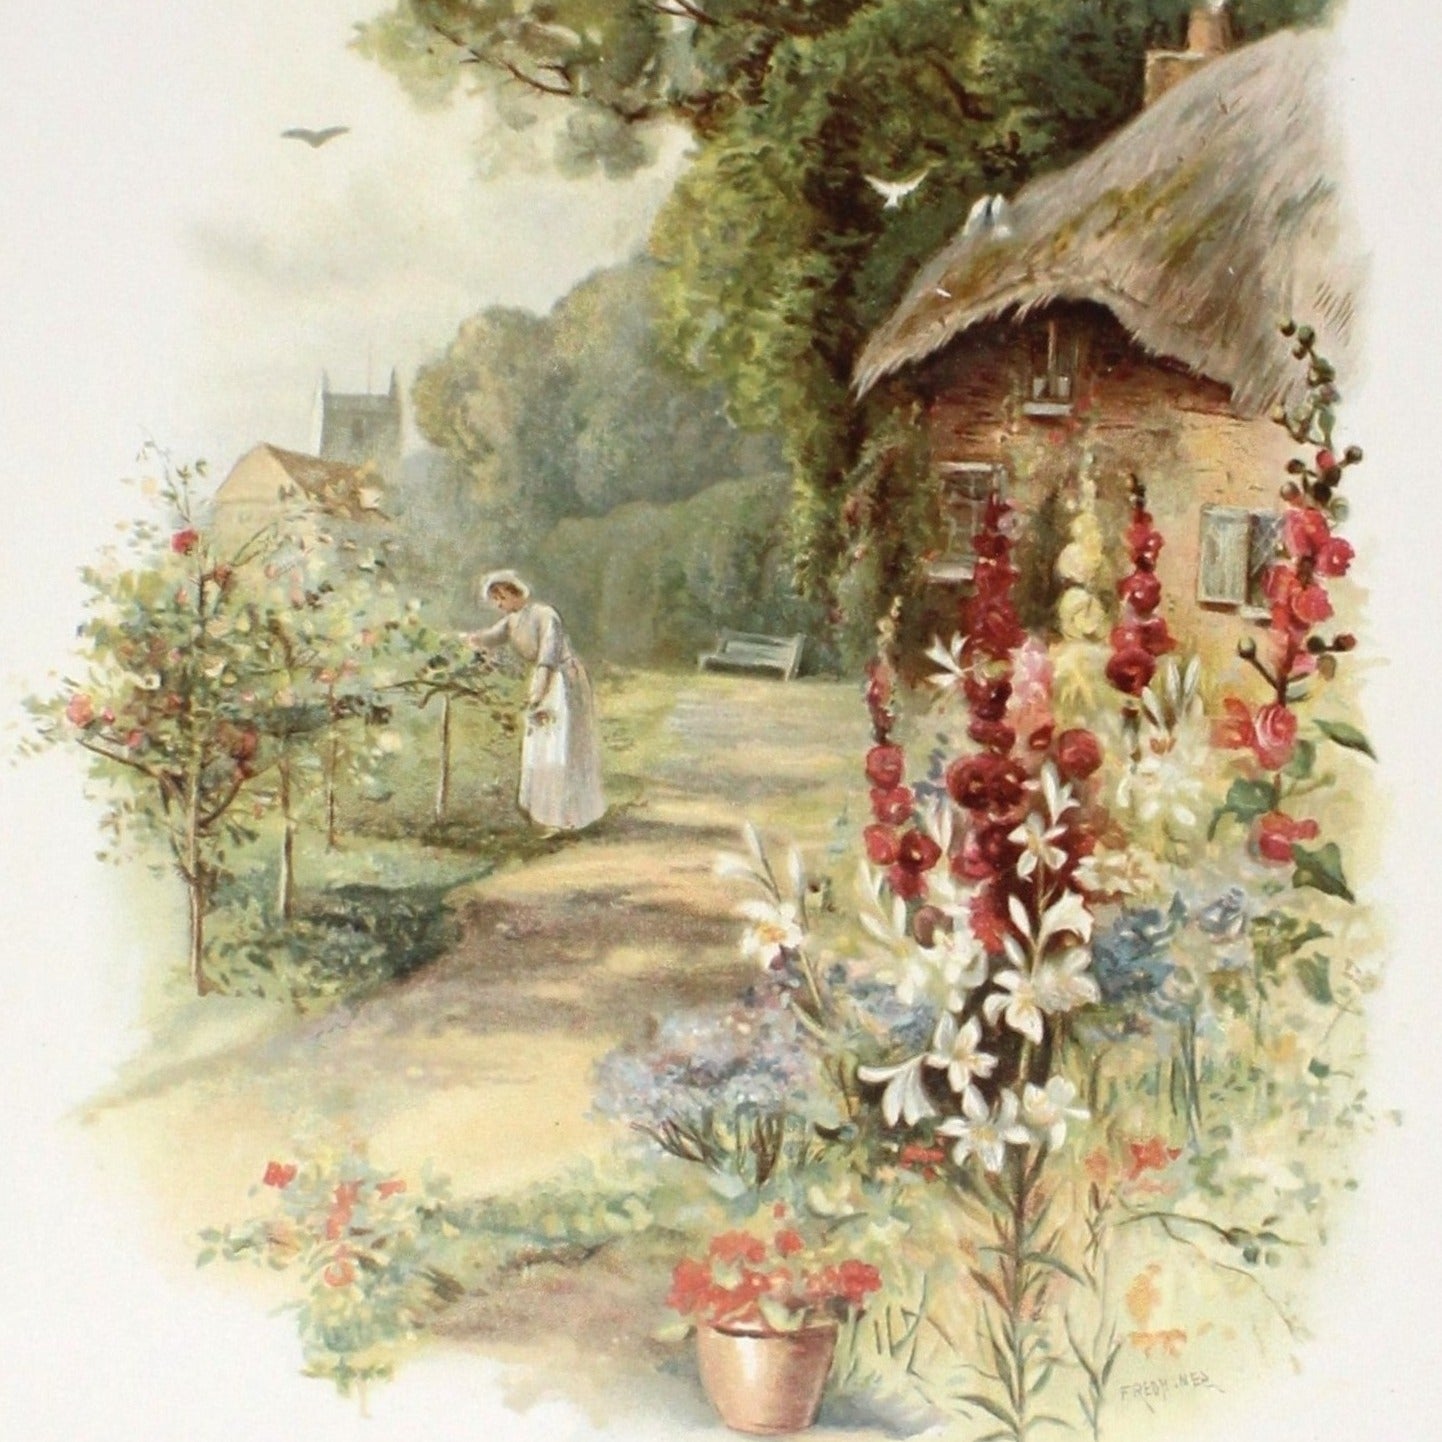 Print, Calendar Page, Fred Hines, Woman in Cottage Garden, June, Vintage